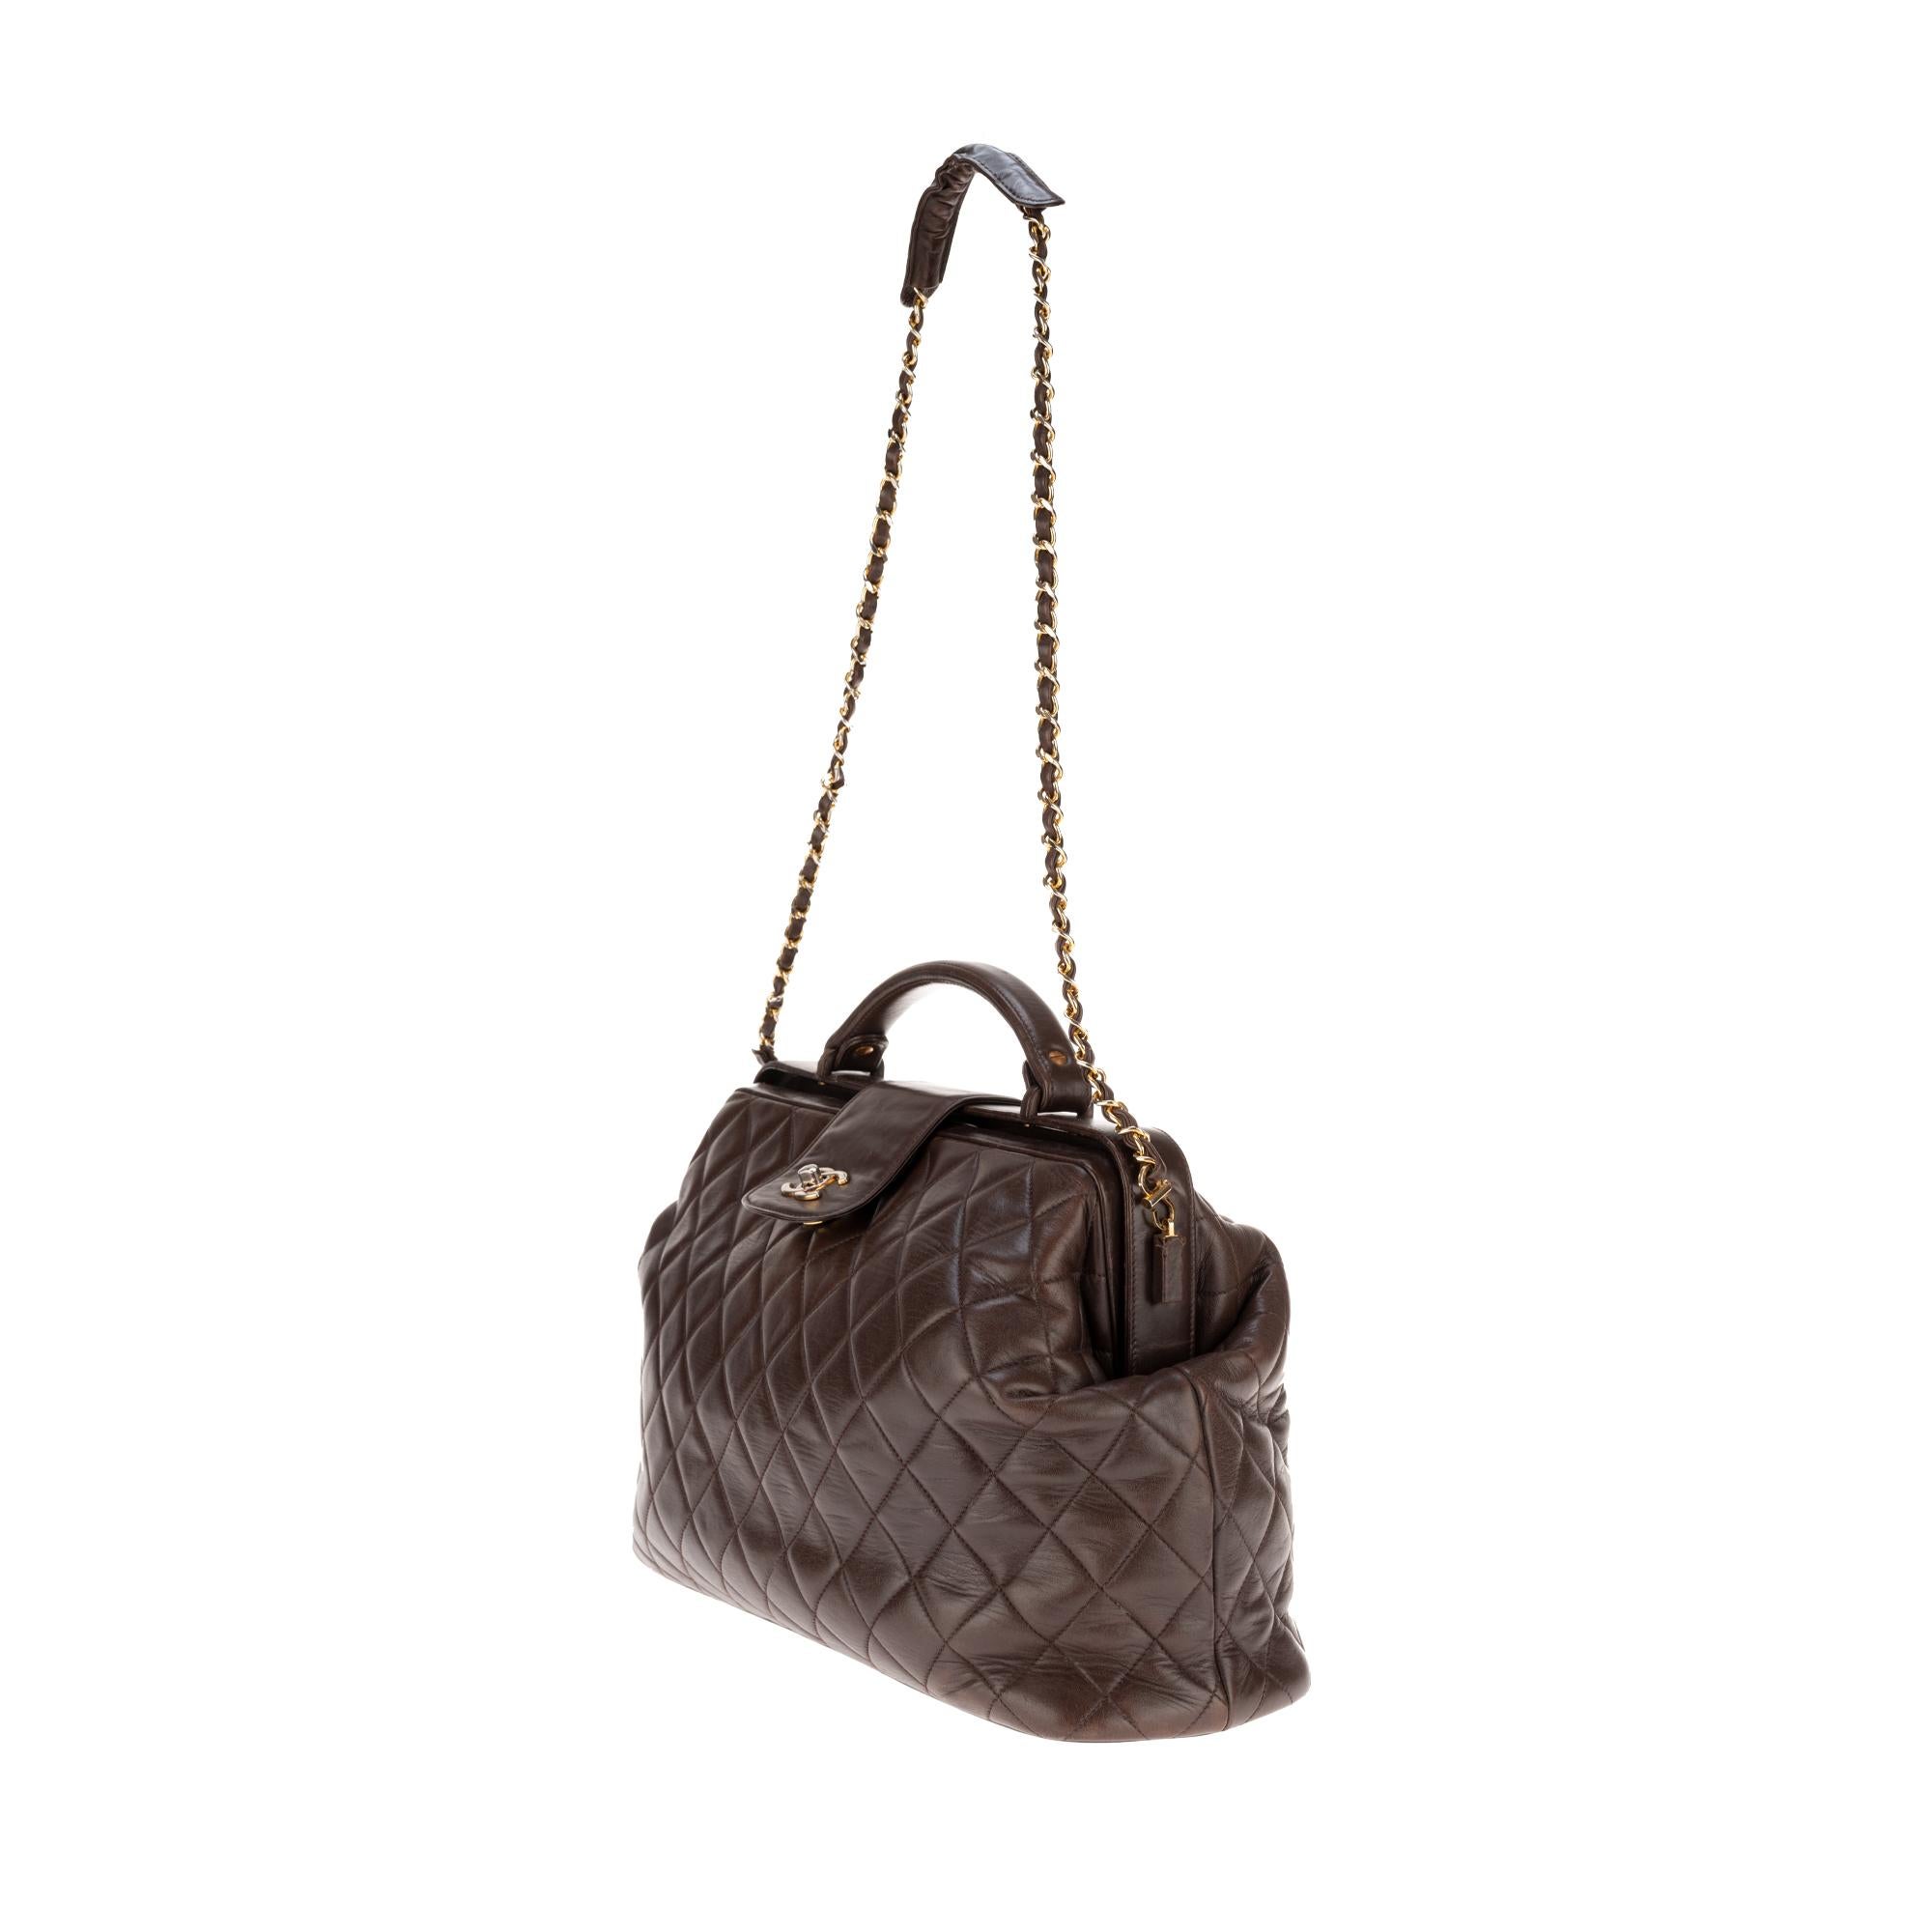 Women's Chanel briefcase style handbag in brown quilted lambskin !